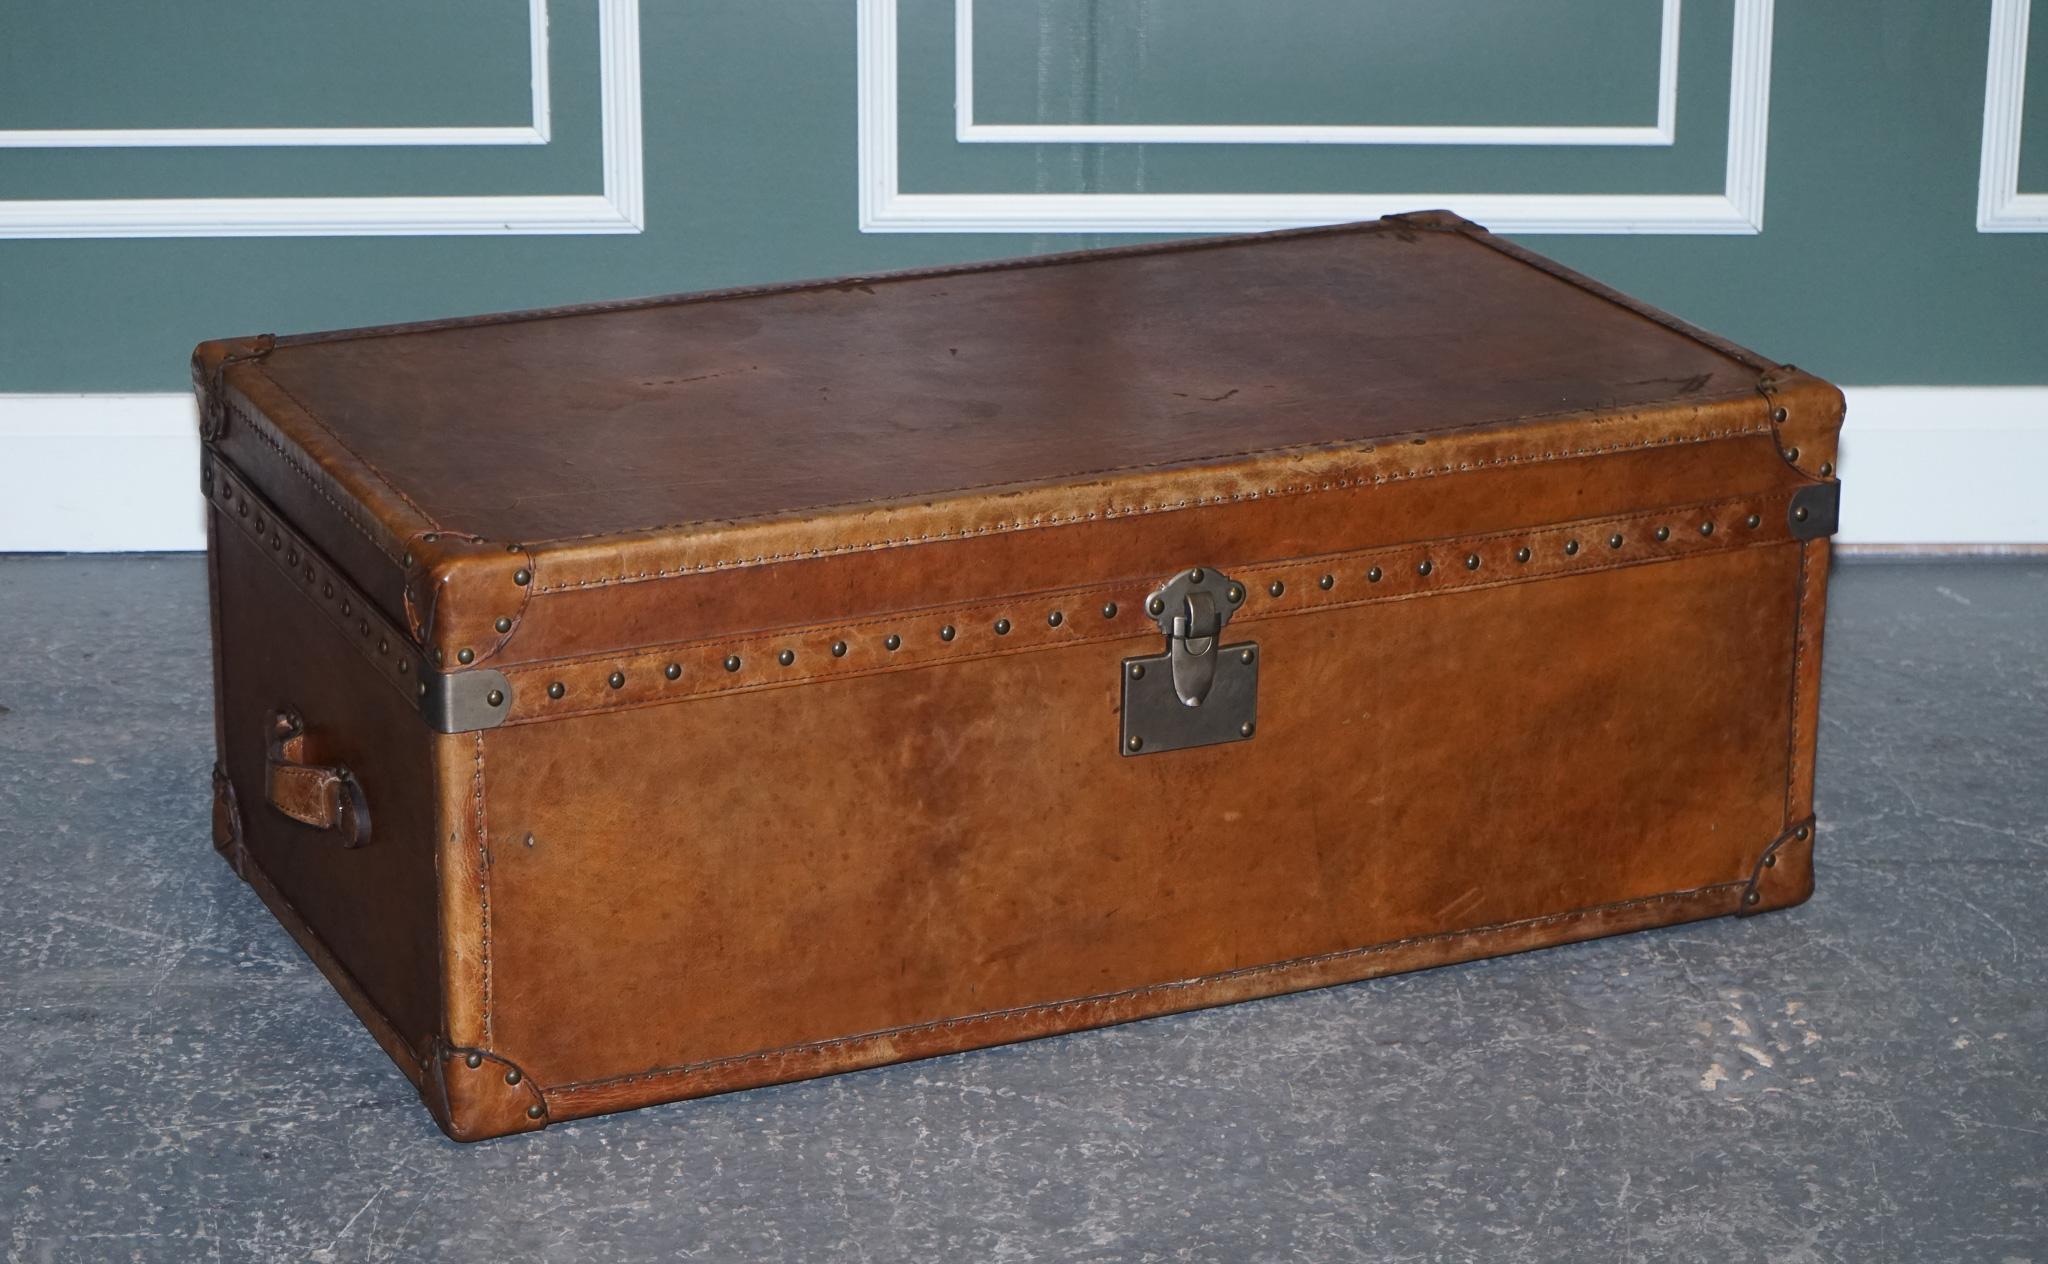 
We are delighted to present to you this Timothy Oulton Vintage Brown Leather Trunk.

A very good-looking trunk that can be used as a coffee table as well.
The leather has been stripped back and dyed serval times to get the lovely colour.
The